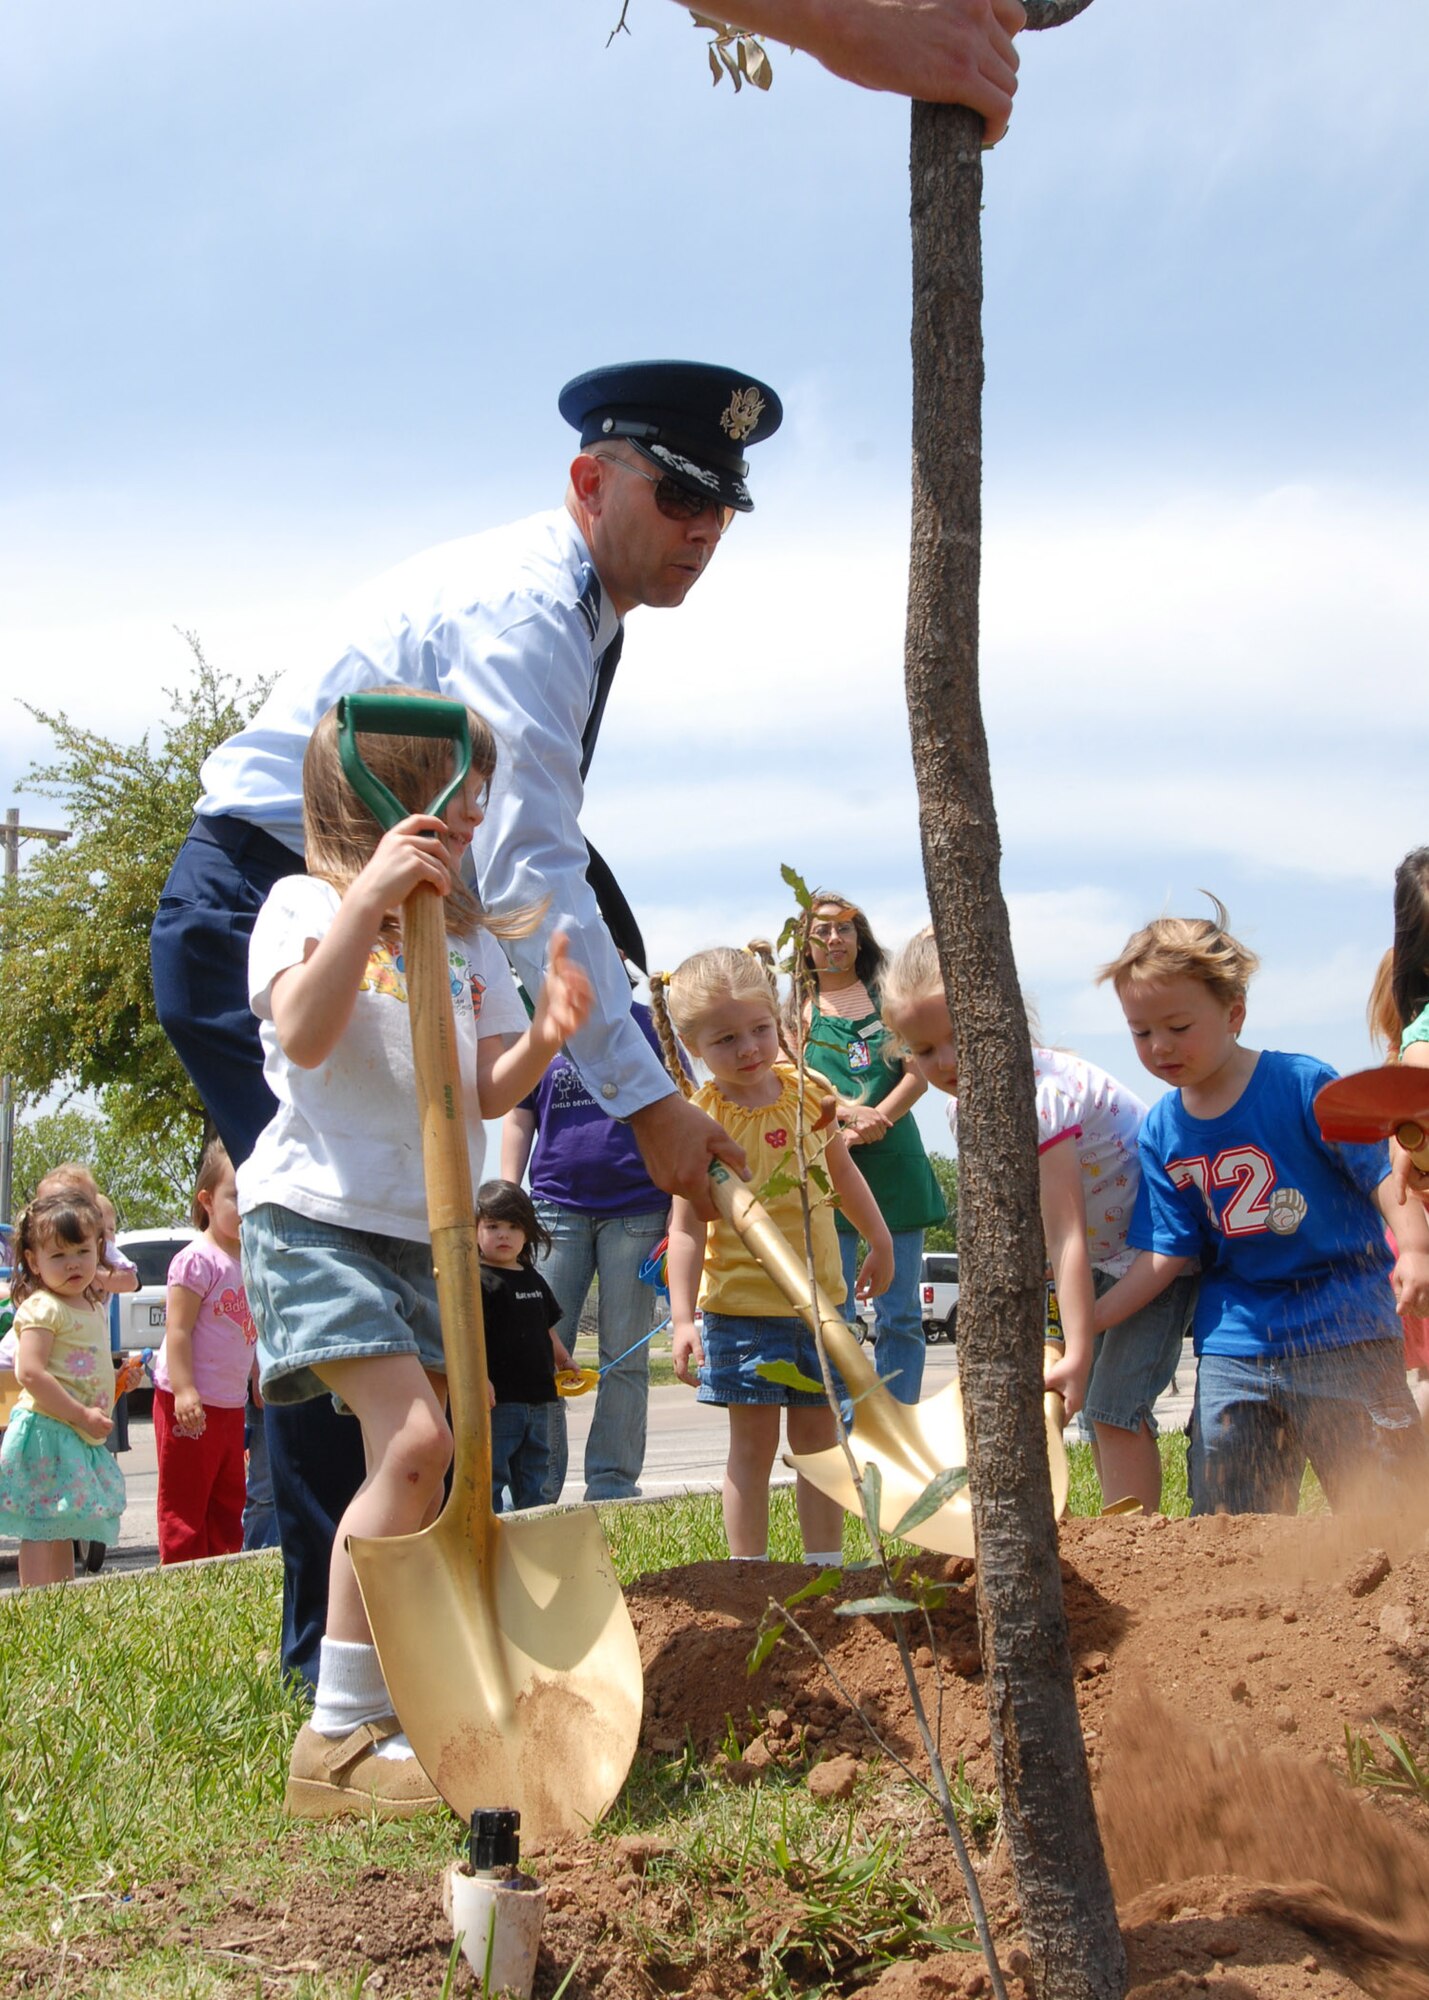 Col. Stephen Czerwinski, 17th Mission Support Group commander, digs in while helping to plant a tree during the Child Development Center’s Arbor Day celebration April 27.  (U.S. Air Force photo by Staff Sgt. Angela Malek)